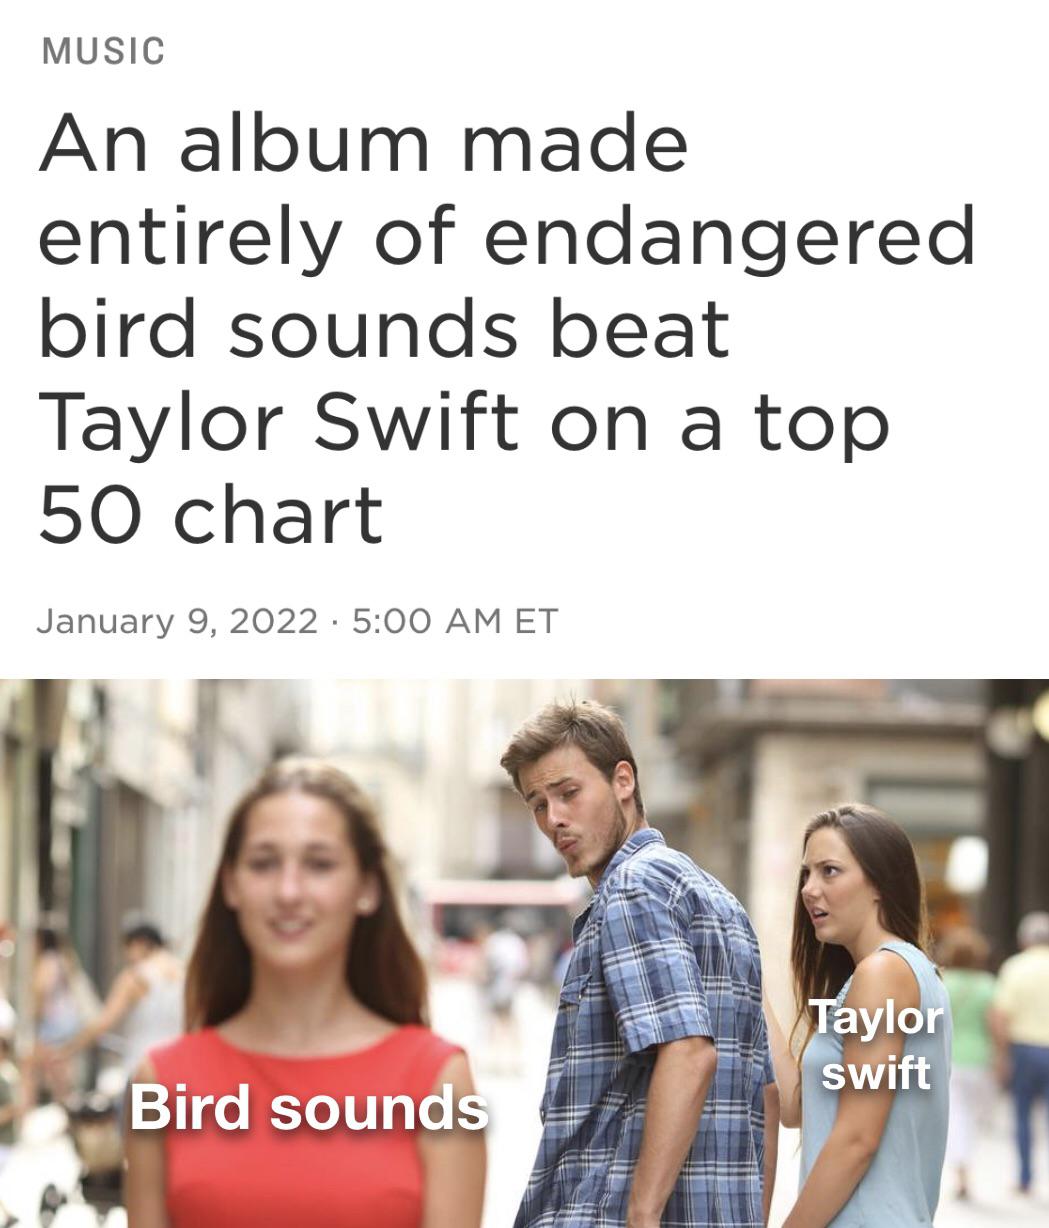 dank memes, funny memes - whistle if you love your girlfriend - Music An album made entirely of endangered bird sounds beat Taylor Swift on a top 50 chart Et Taylor swift Bird sounds